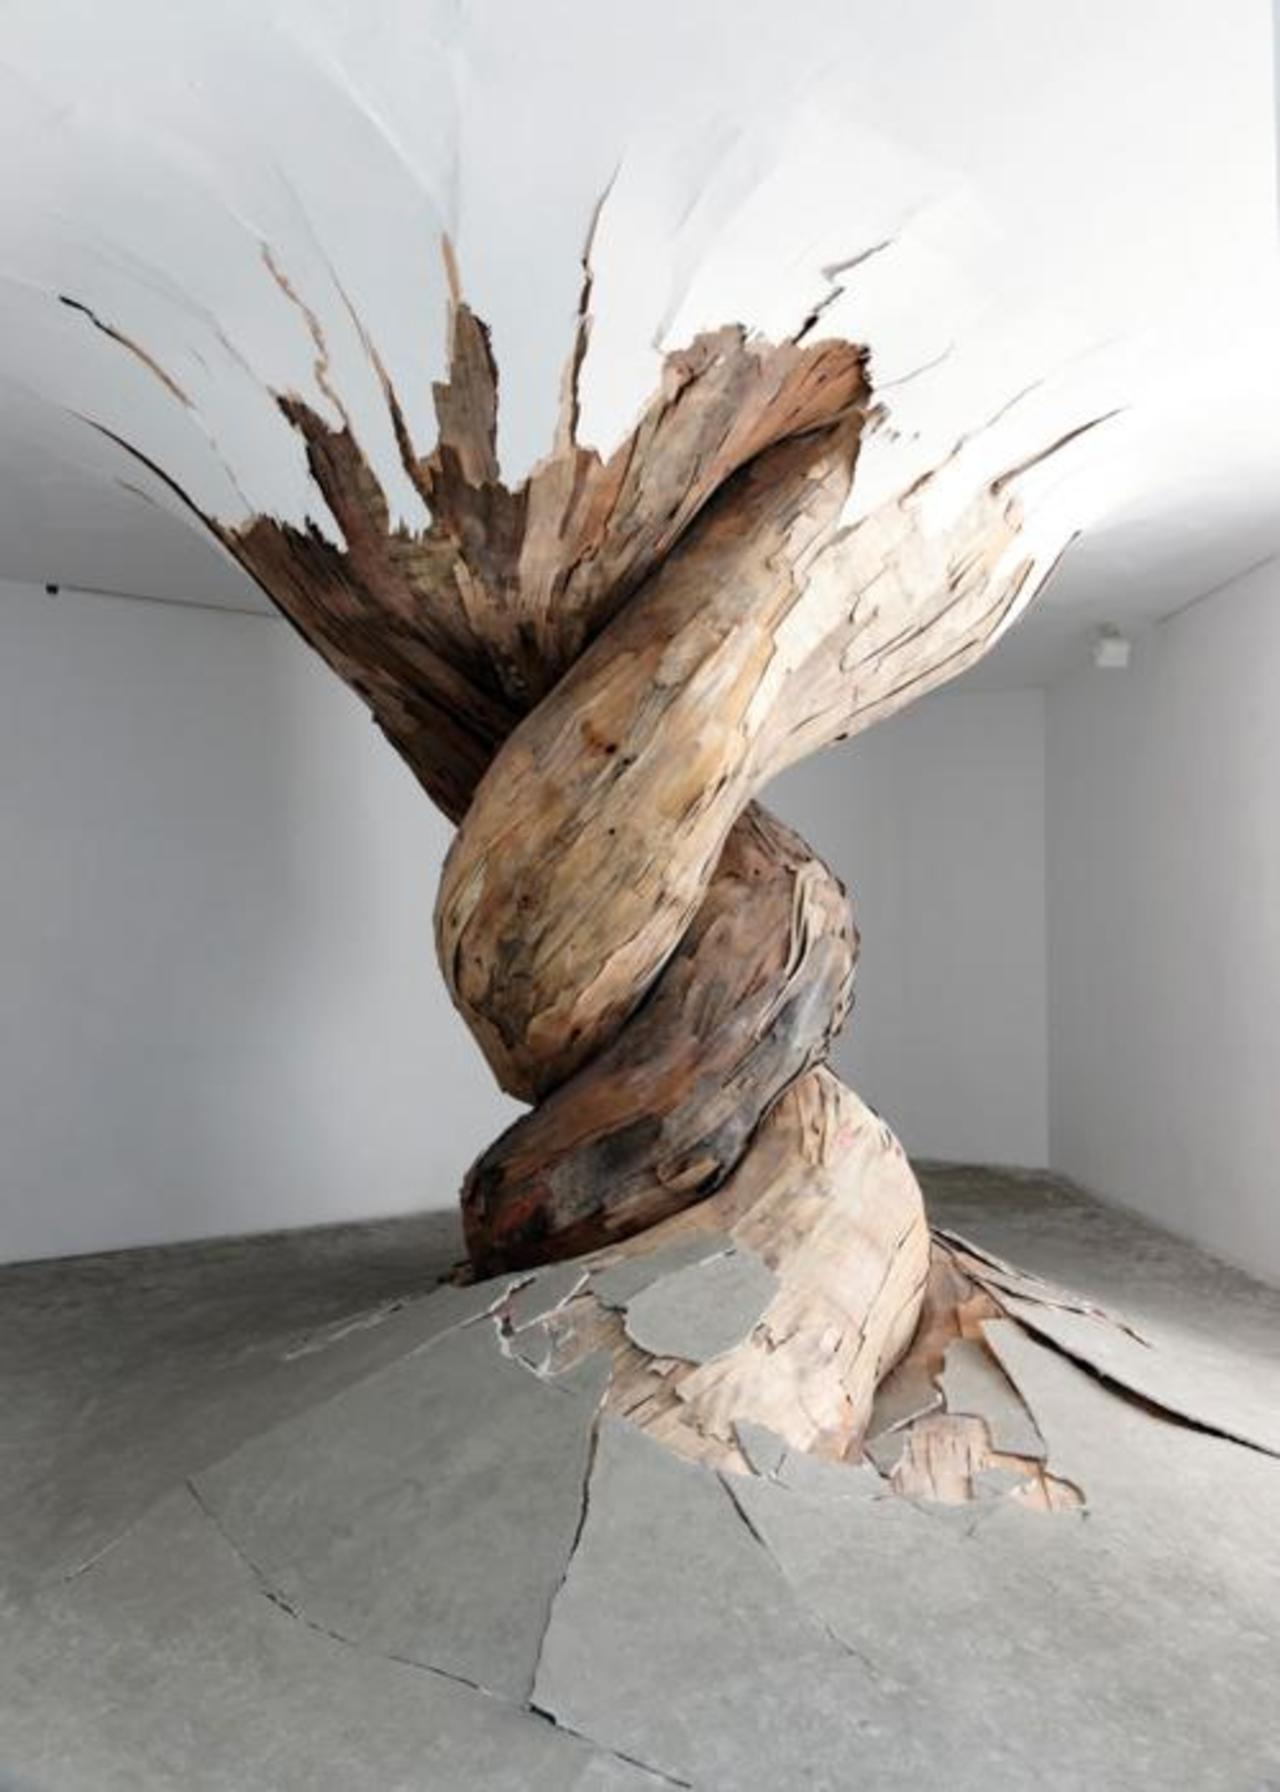 Amazing installations by Henrique Oliveira (Brazil). #art #installation #wood #amazing http://t.co/FHRb0TscDg